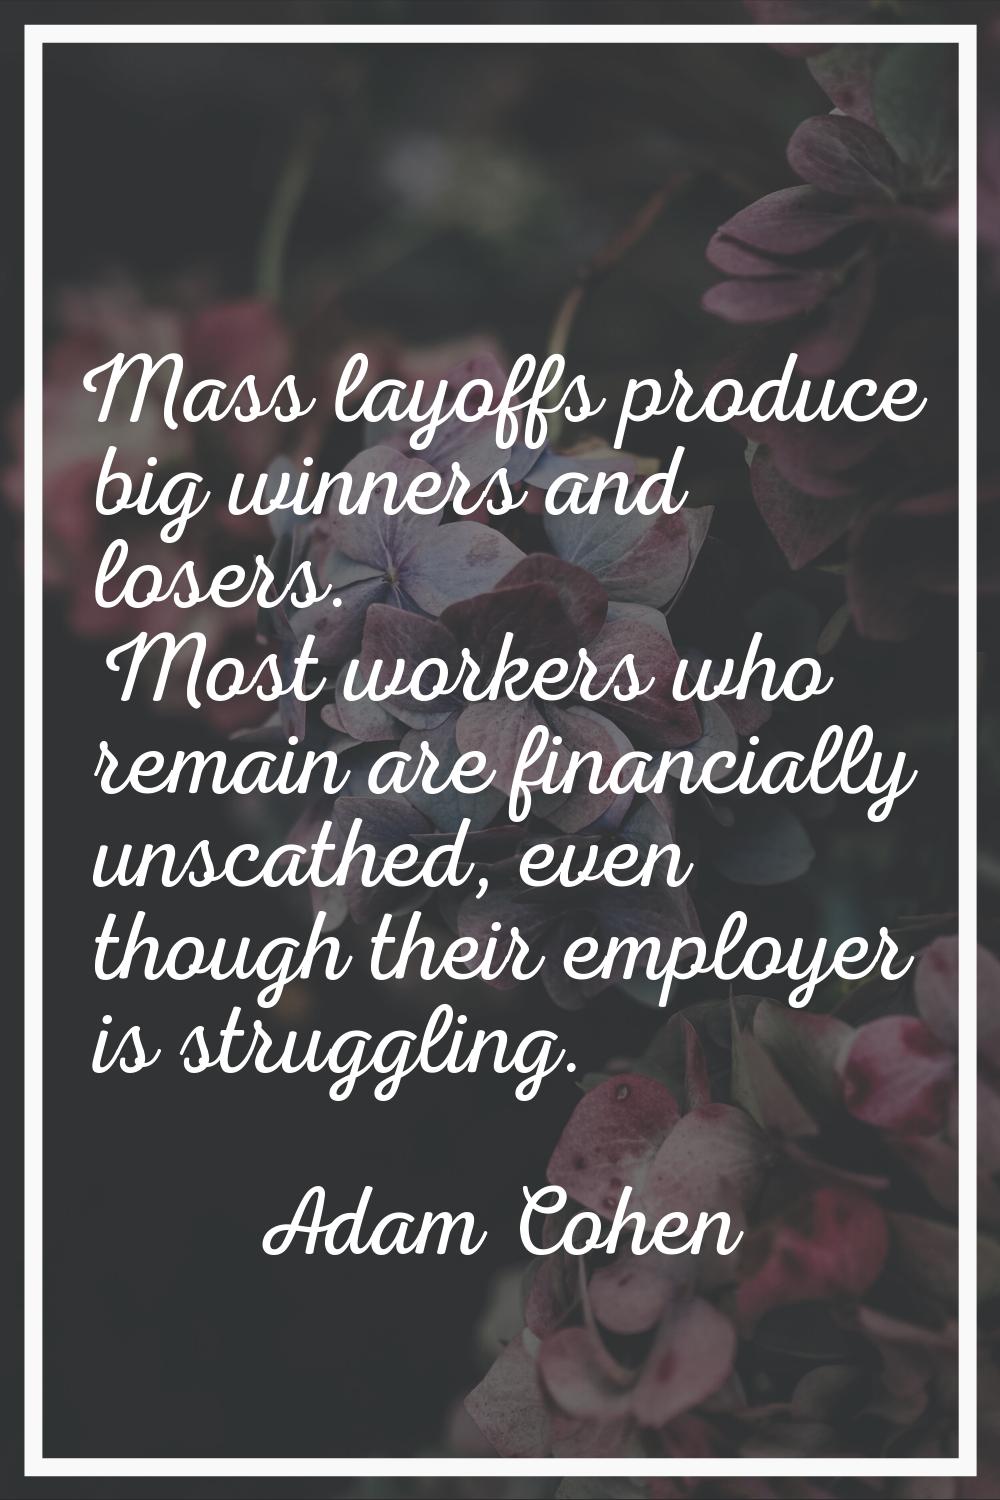 Mass layoffs produce big winners and losers. Most workers who remain are financially unscathed, eve